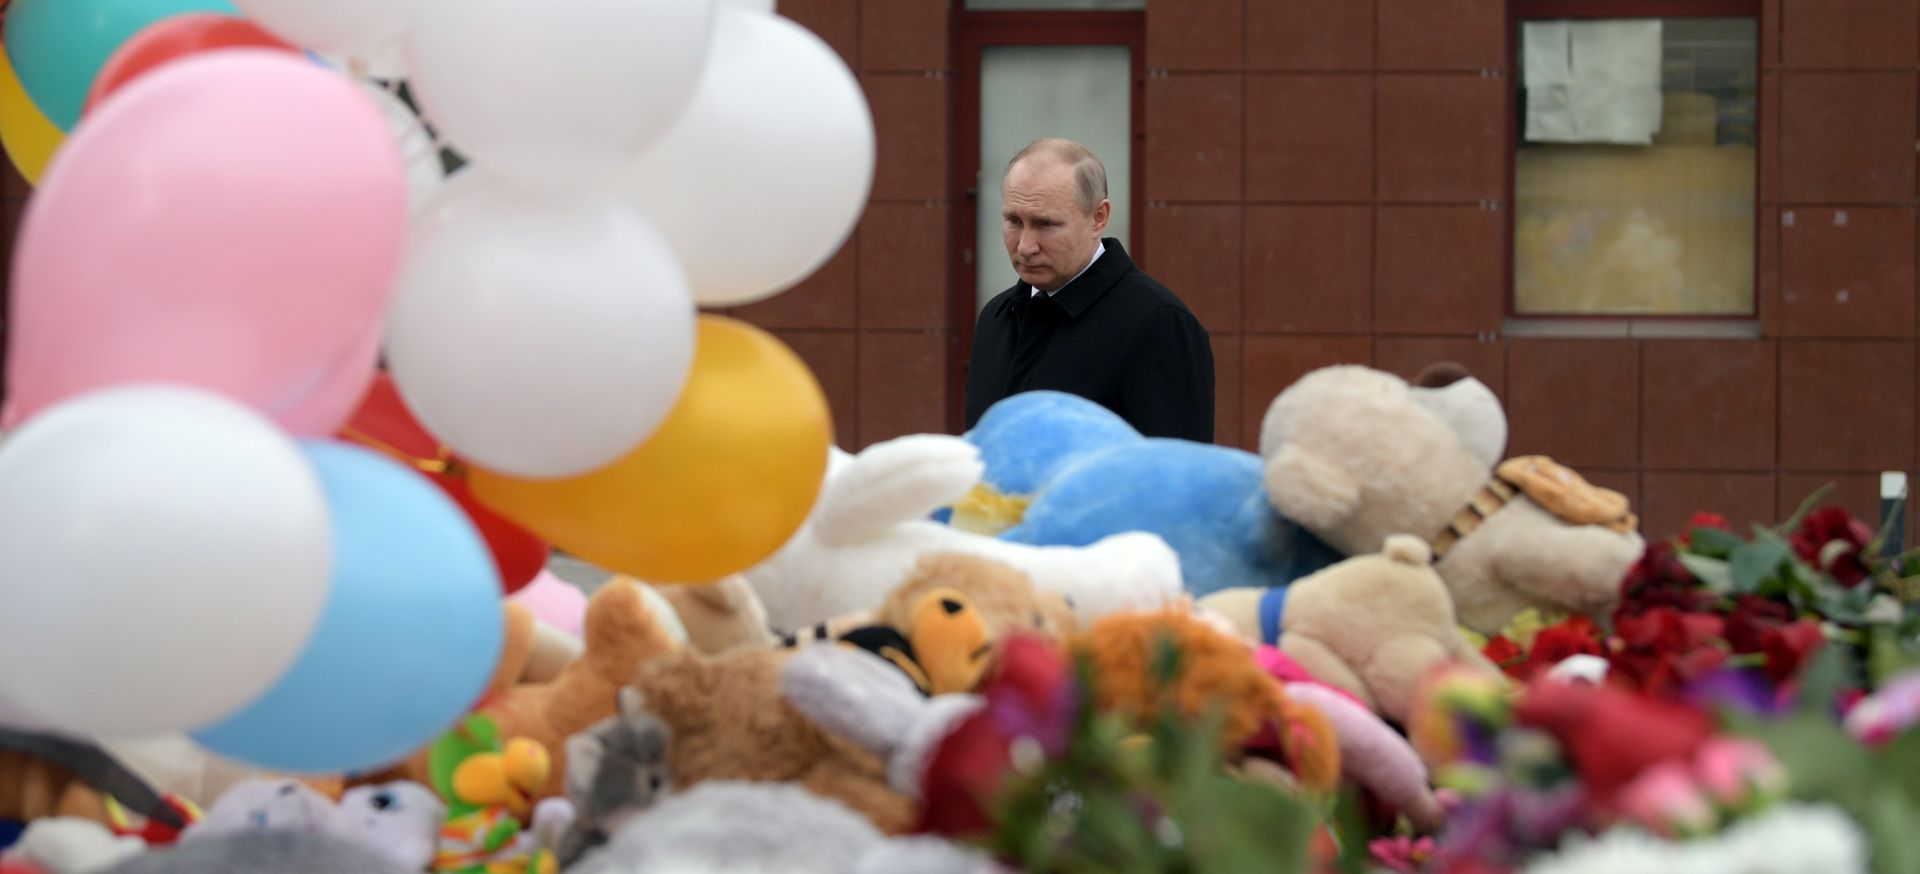 epa06631488 Russian President Vladimir Putin visits a makeshift memorial site for the victims of a fire at the Zimnyaya Vishnya shopping center in the West Siberian city of Kemerovo, Russia, 27 March 2018. According to media reports, 64 people died in the fire.  EPA/ALEXEI DRUZHININ / SPUTNIK / KREMLIN POOL MANDATORY CREDIT